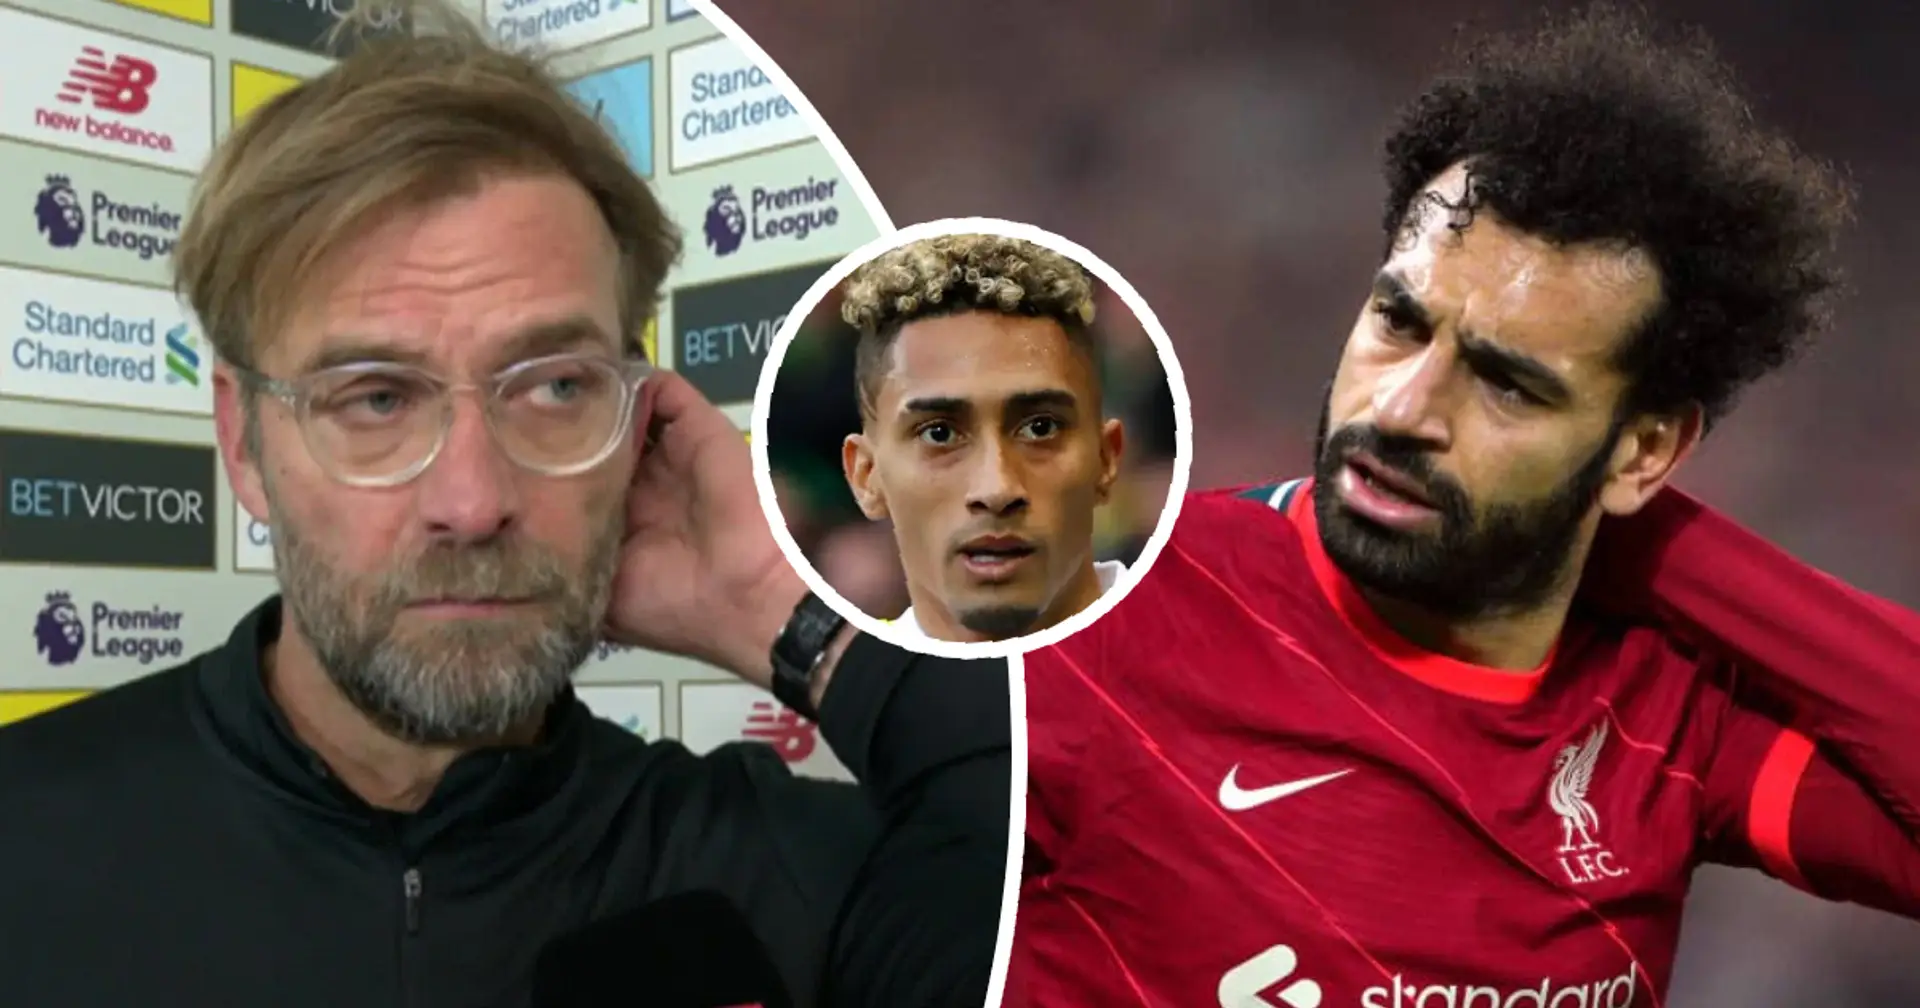 How Liverpool could spend £50m if Salah leaves club this summer: 3 options